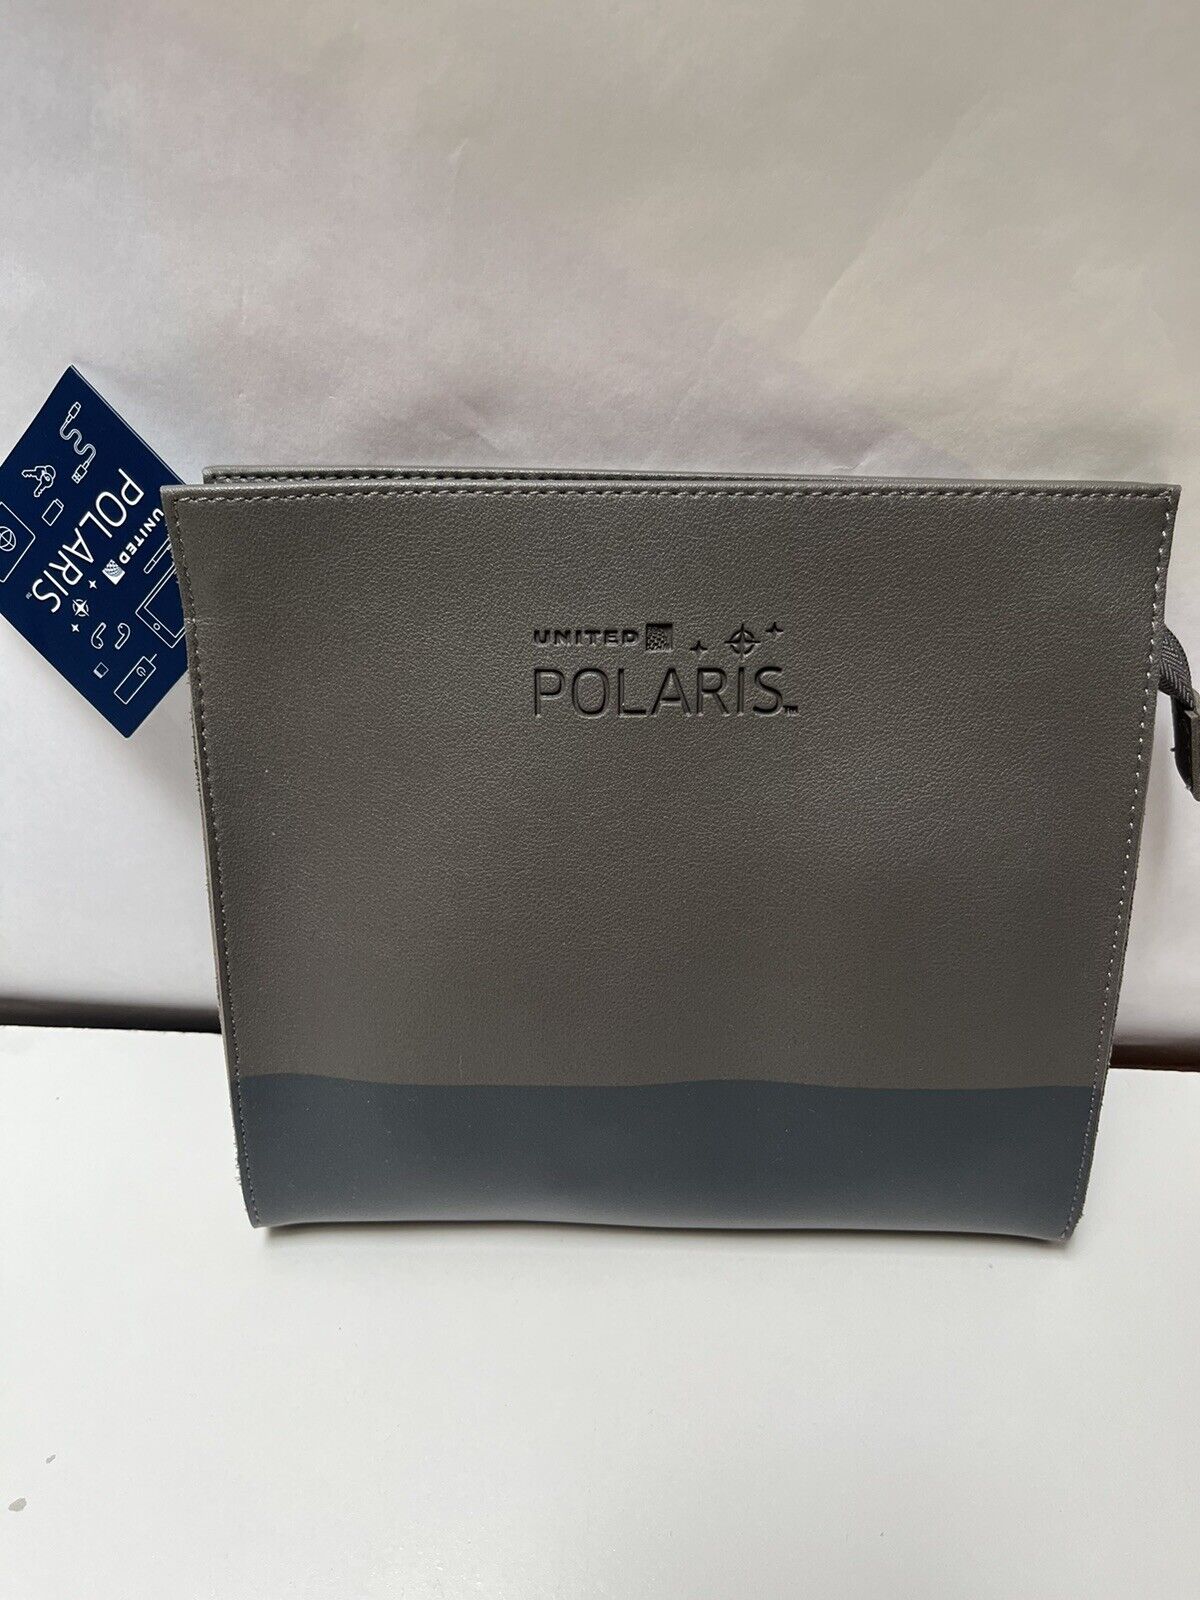 UNITED AIRLINES Polaris Business Class Pouch Bag Amenity Kit SUNDAY RILEY SEALED